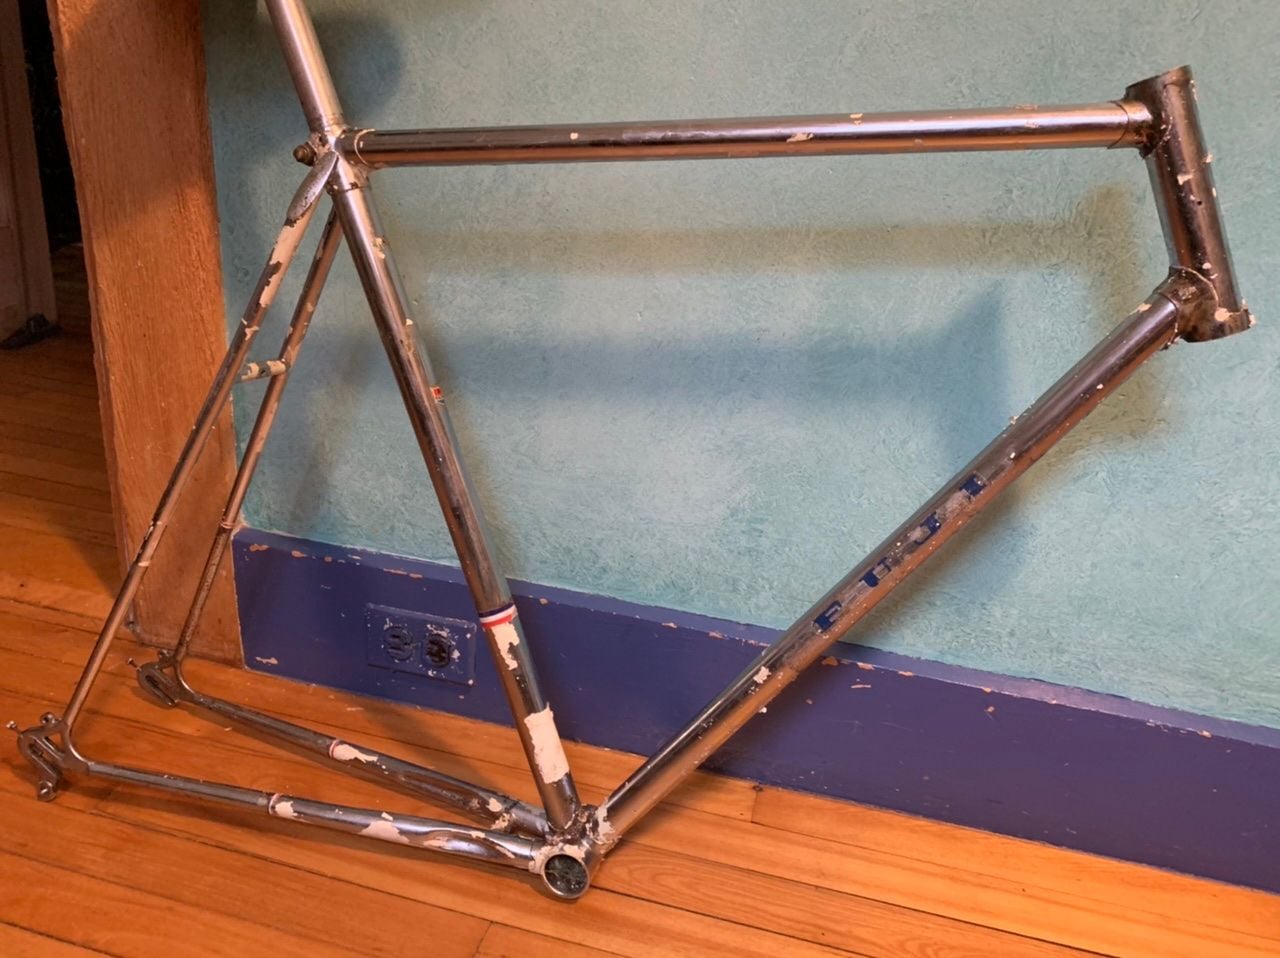 How to expose chrome under paint without damaging it? - Bike Forums